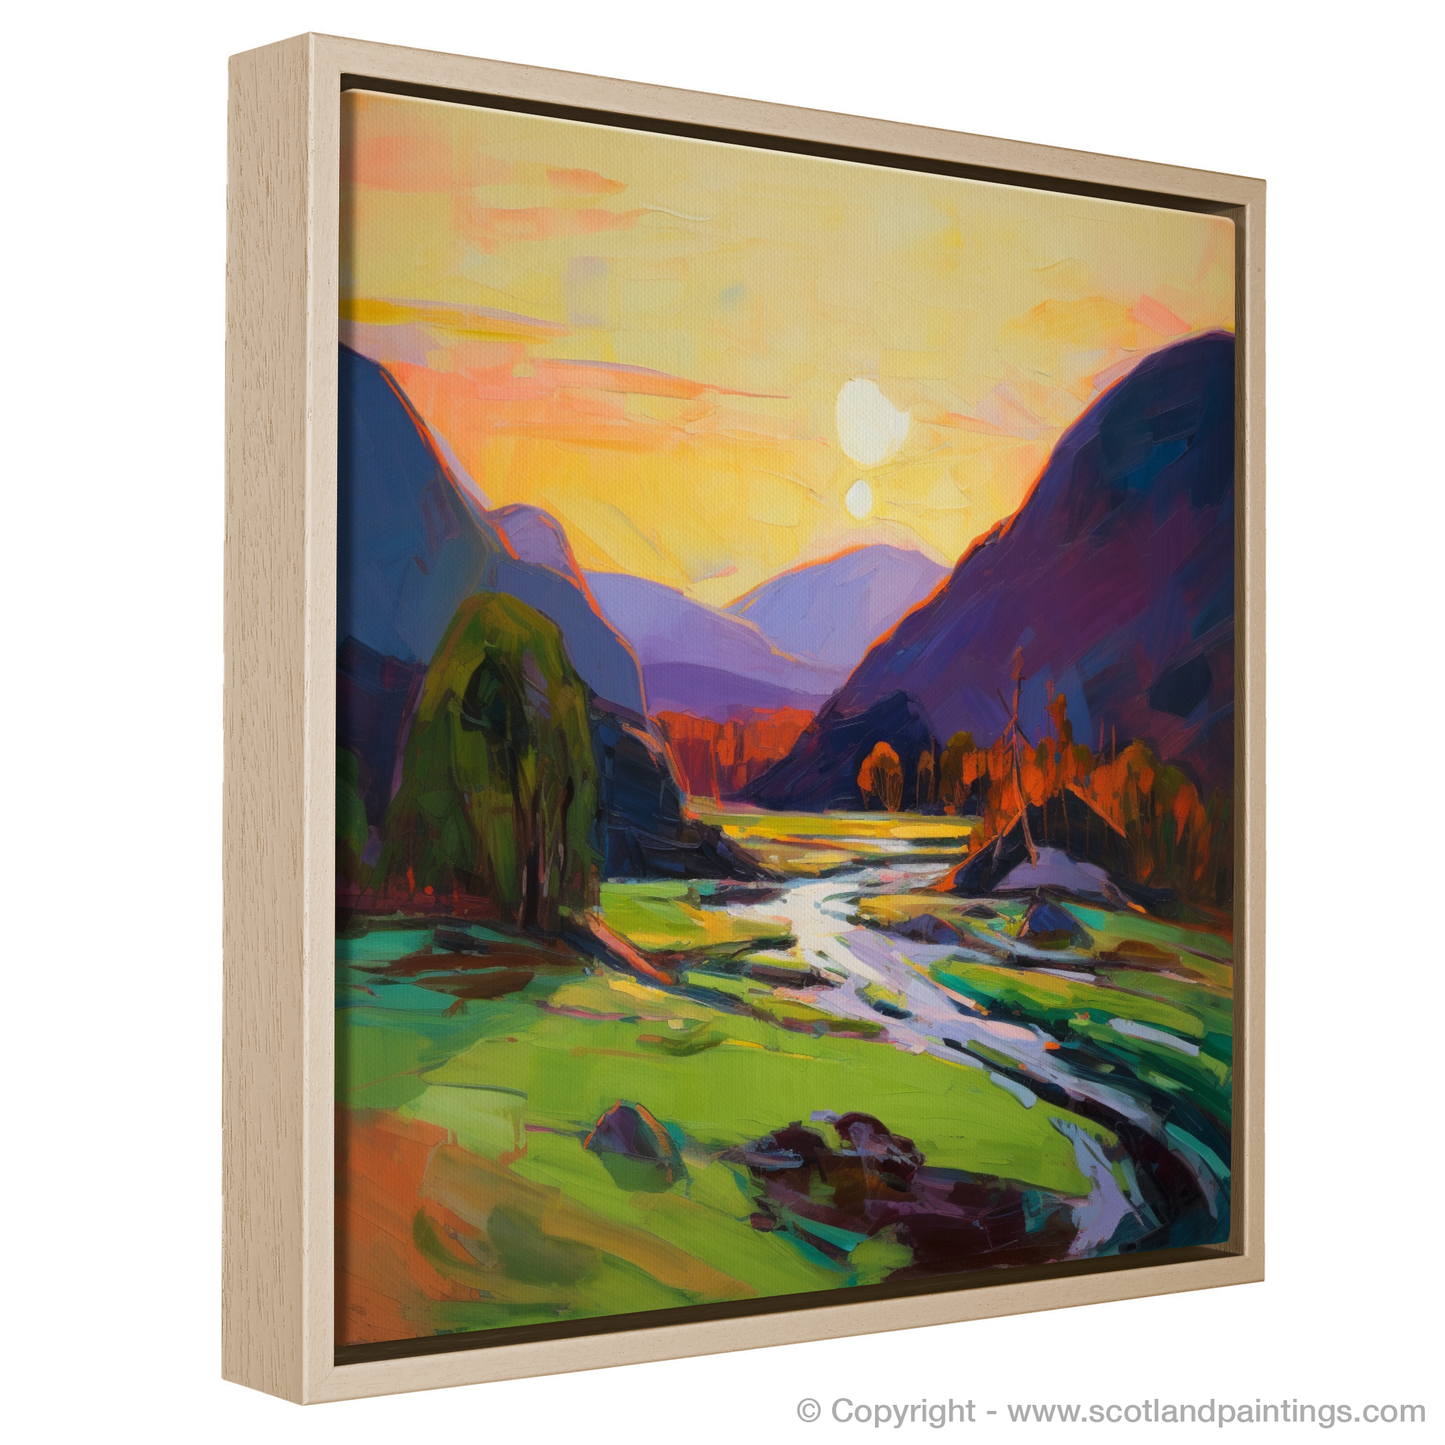 Verdant Glen at Sunset: An Expressionist Ode to Glencoe's Enchantment